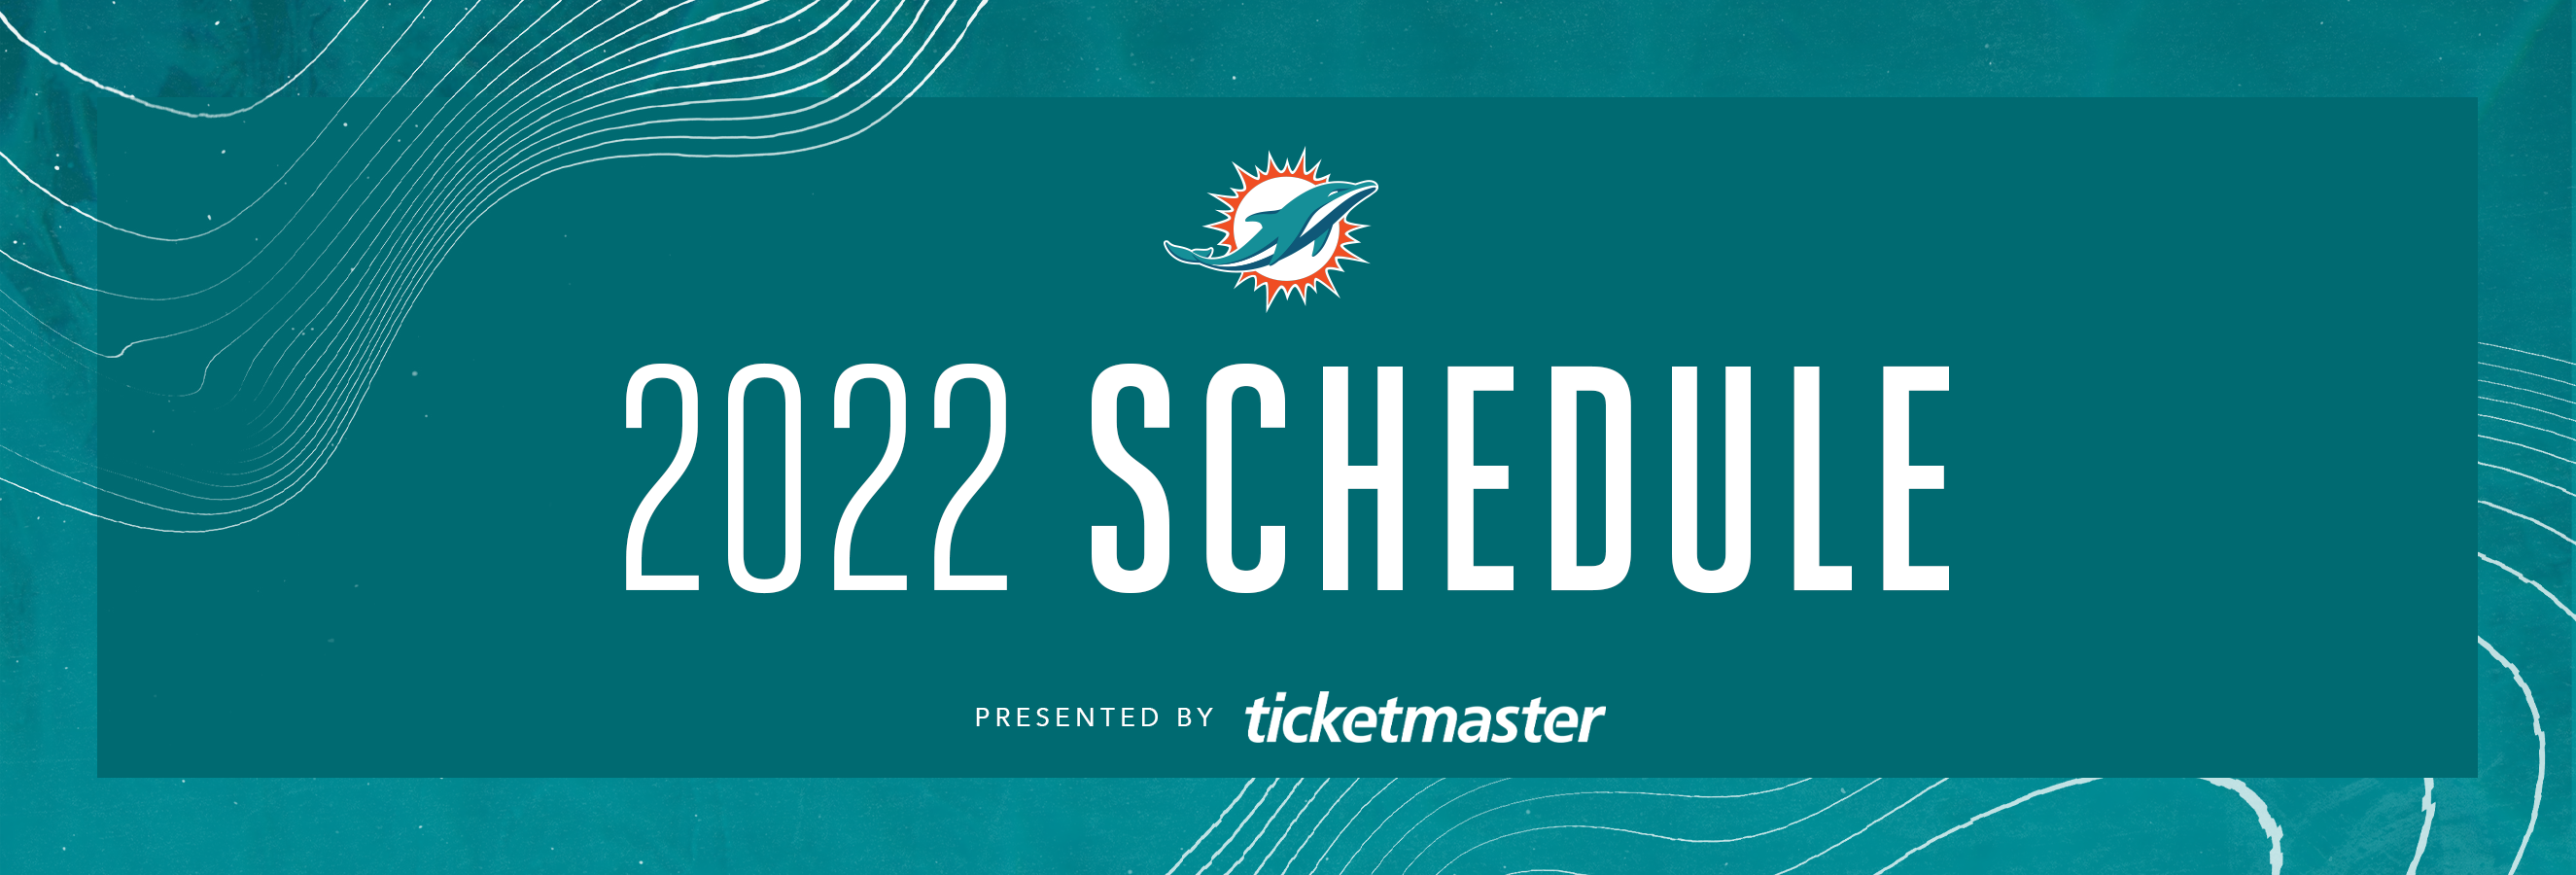 dolphins schedule miami dolphins dolphins com